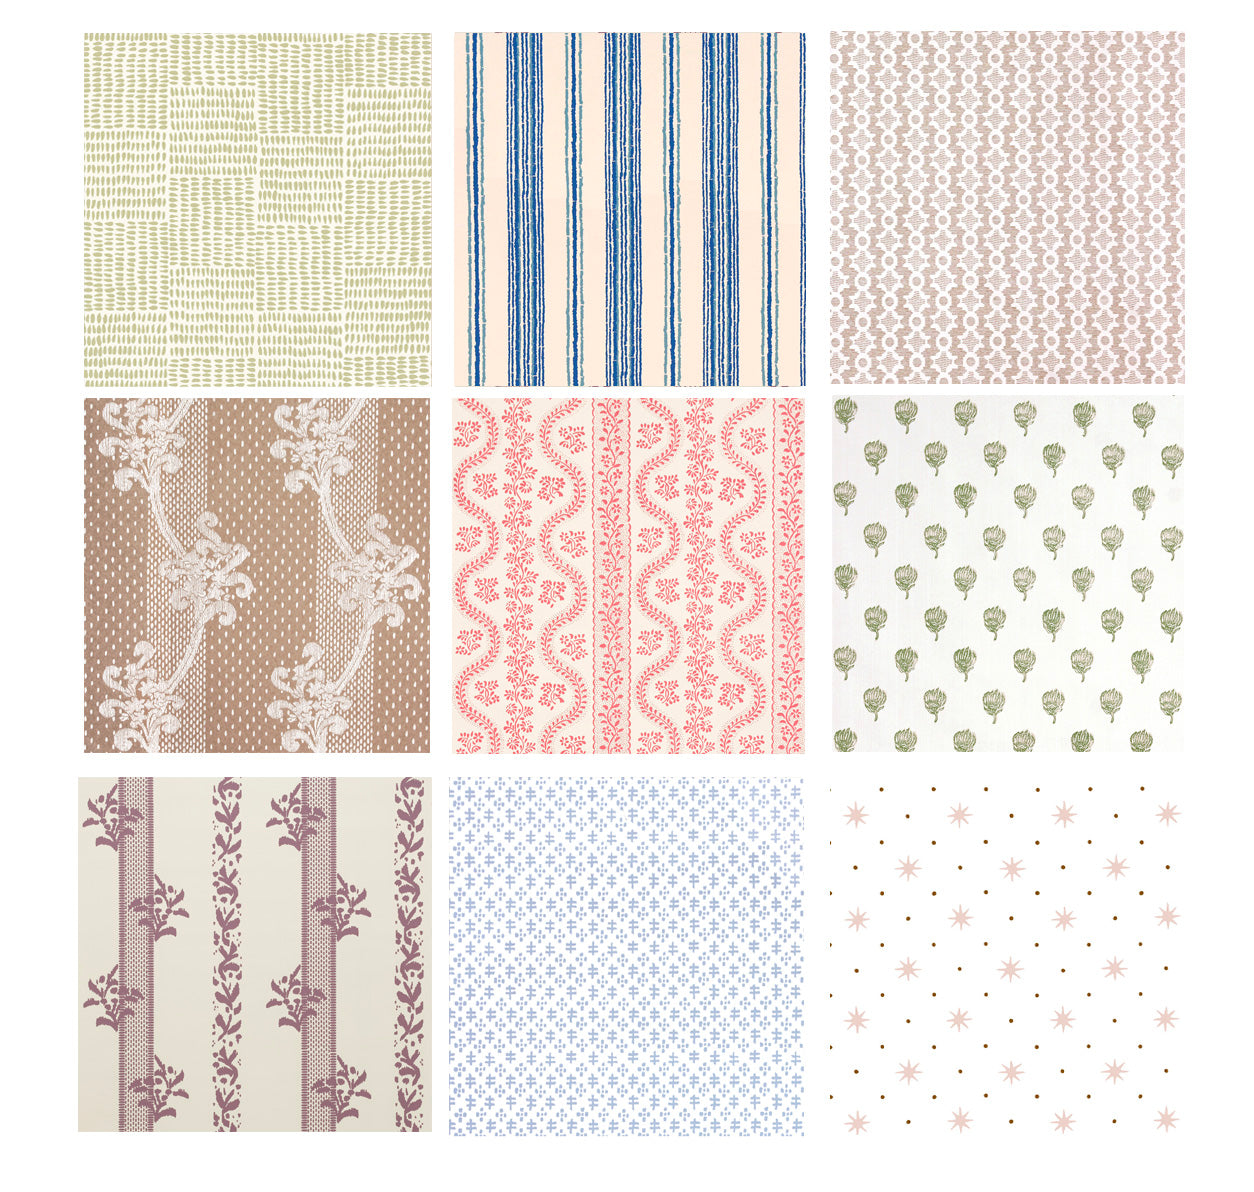 Swatch Set All Wallcoverings